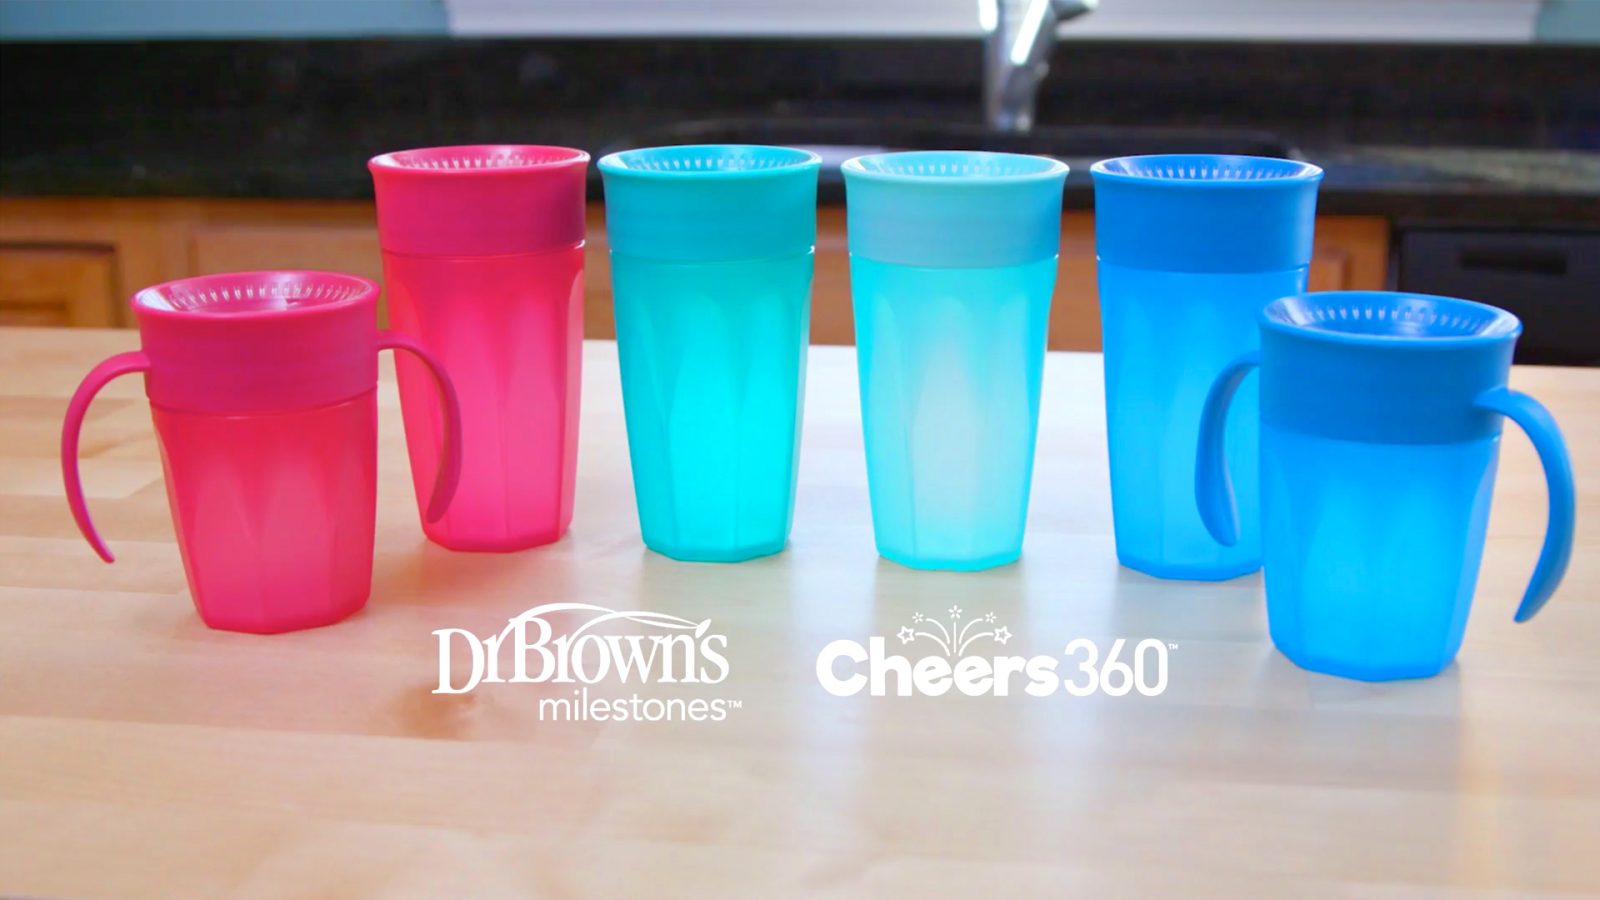 Dr. Brown's Dr. Brown’s™ Cheers 360 Spoutless Transition Sippy Cup With Handles, 7oz (6m+)